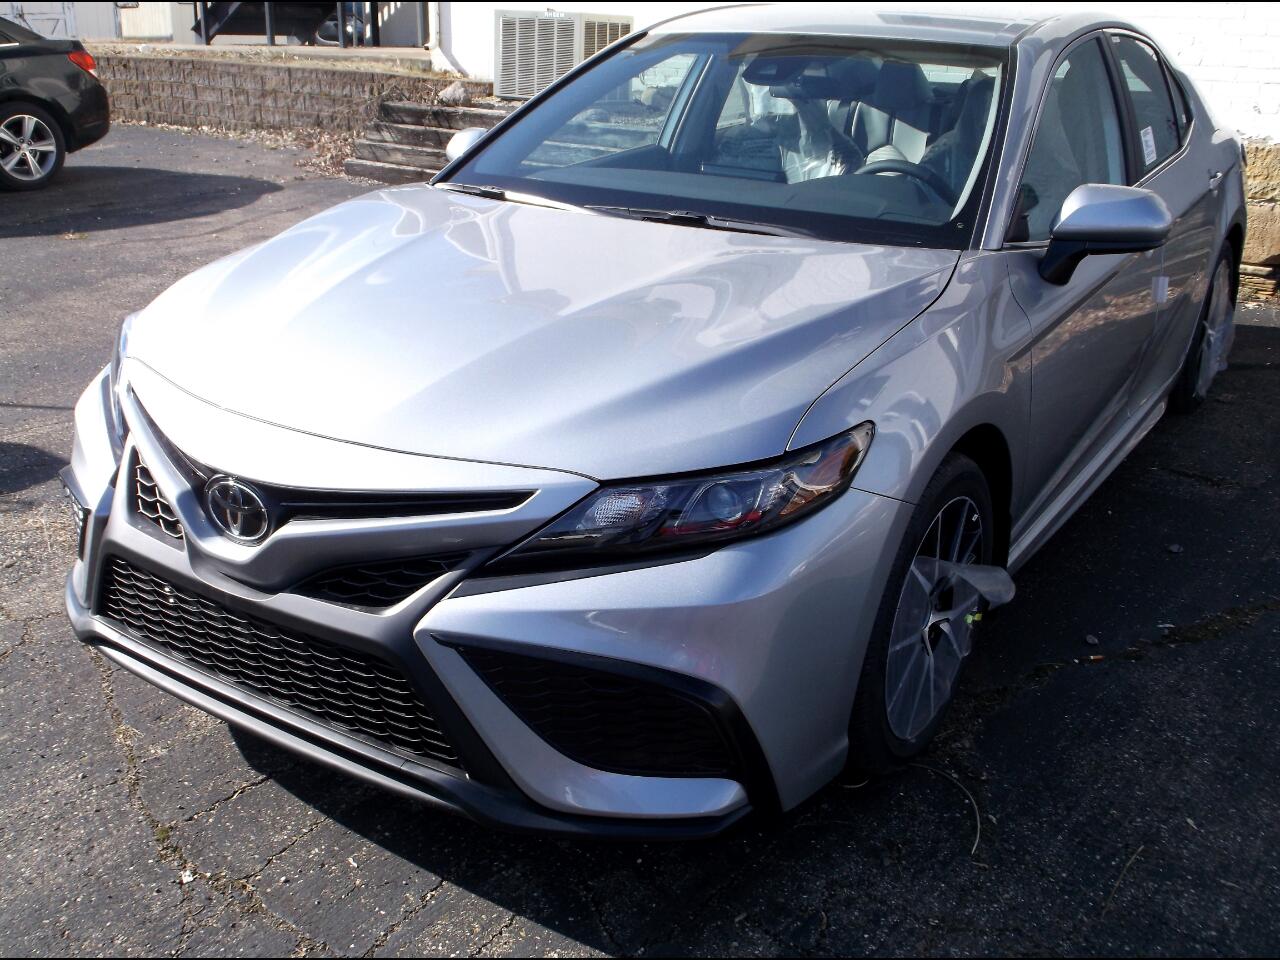 New 2021 Toyota Camry SE Auto AWD (Natl) for Sale in Logan OH 43138